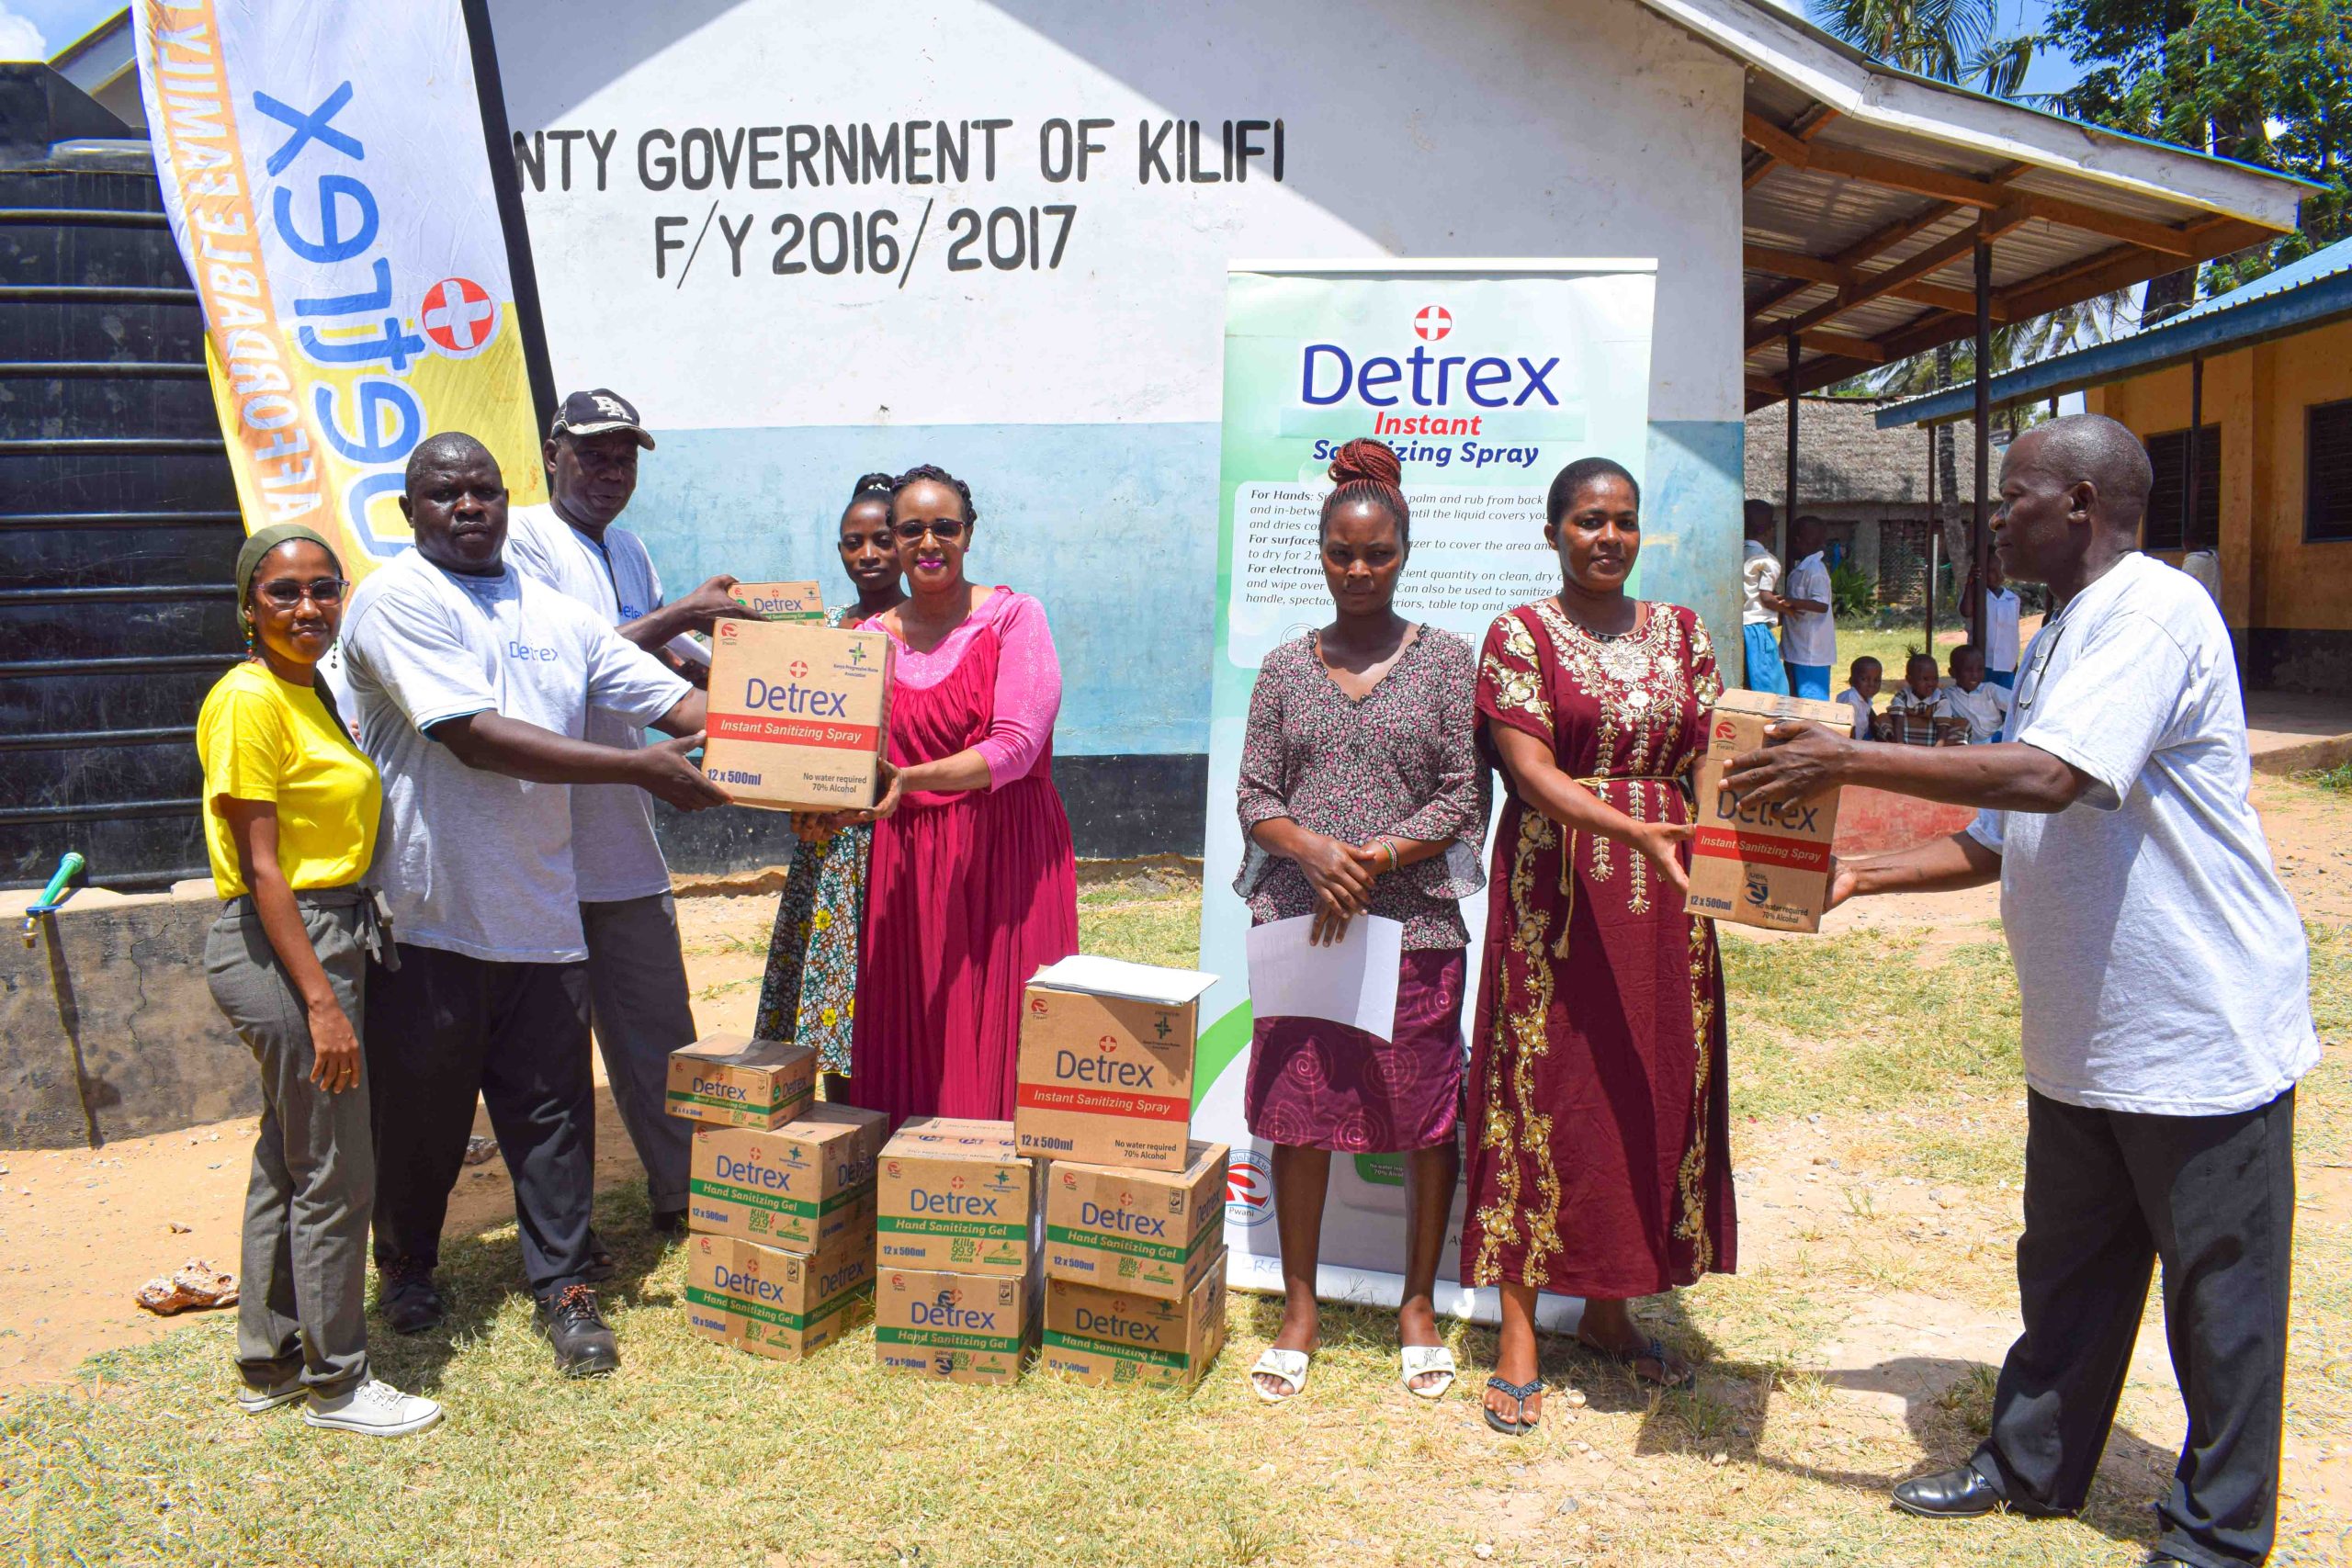 Pwani Oil Donates Sanitizers to Students in Kilifi to Fight Red Eye Disease